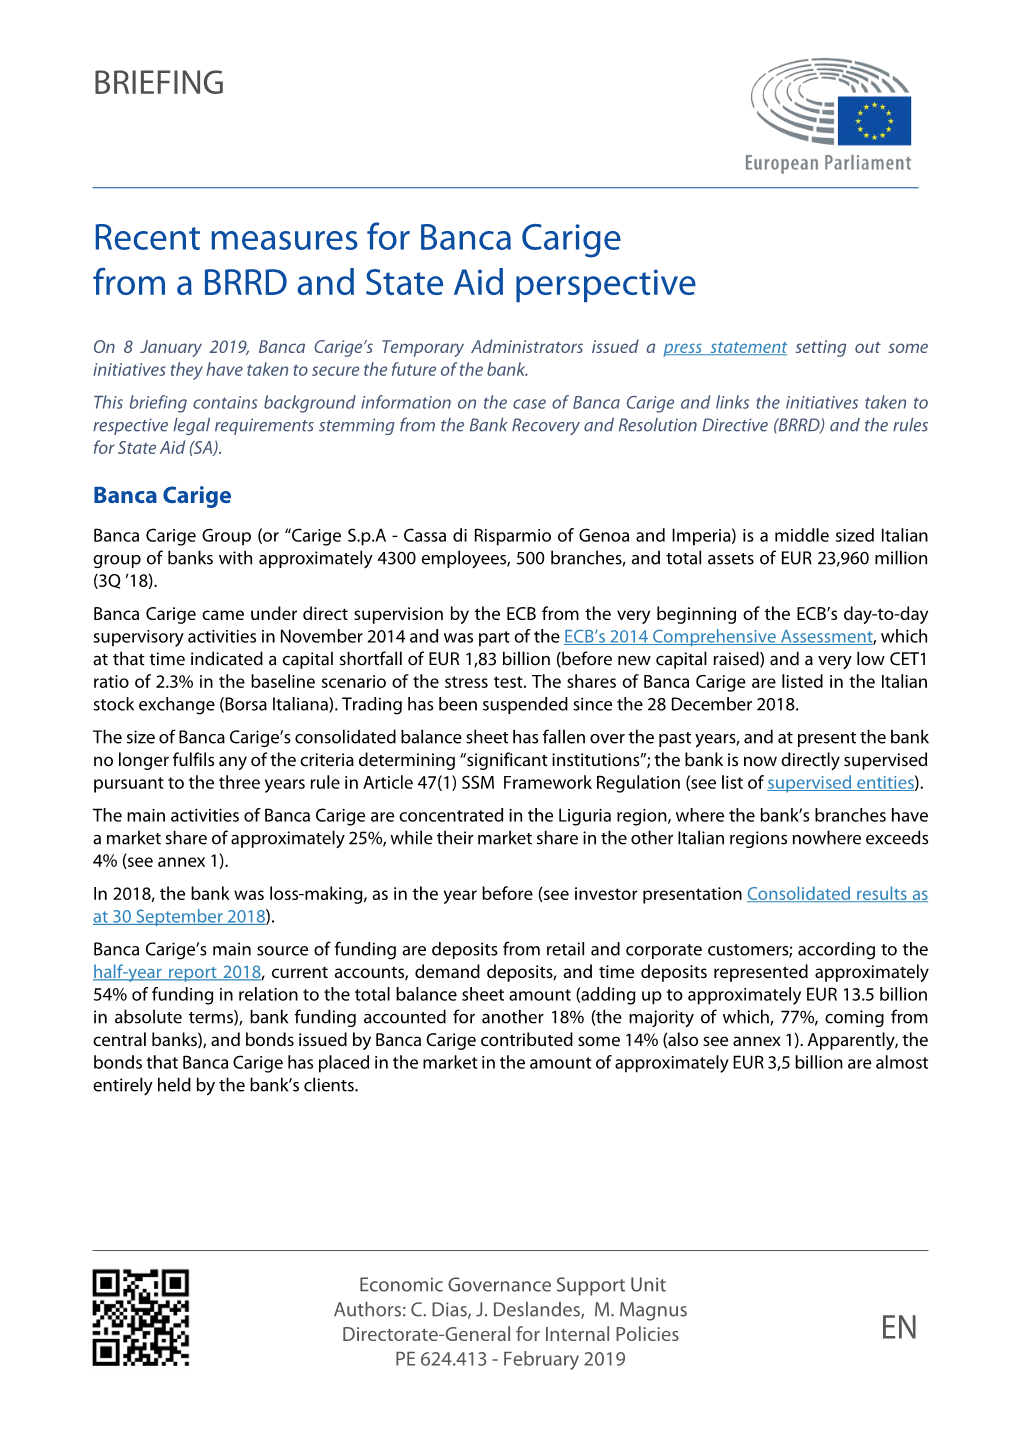 Recent Measures for Banca Carige from a BRRD and State Aid Perspective